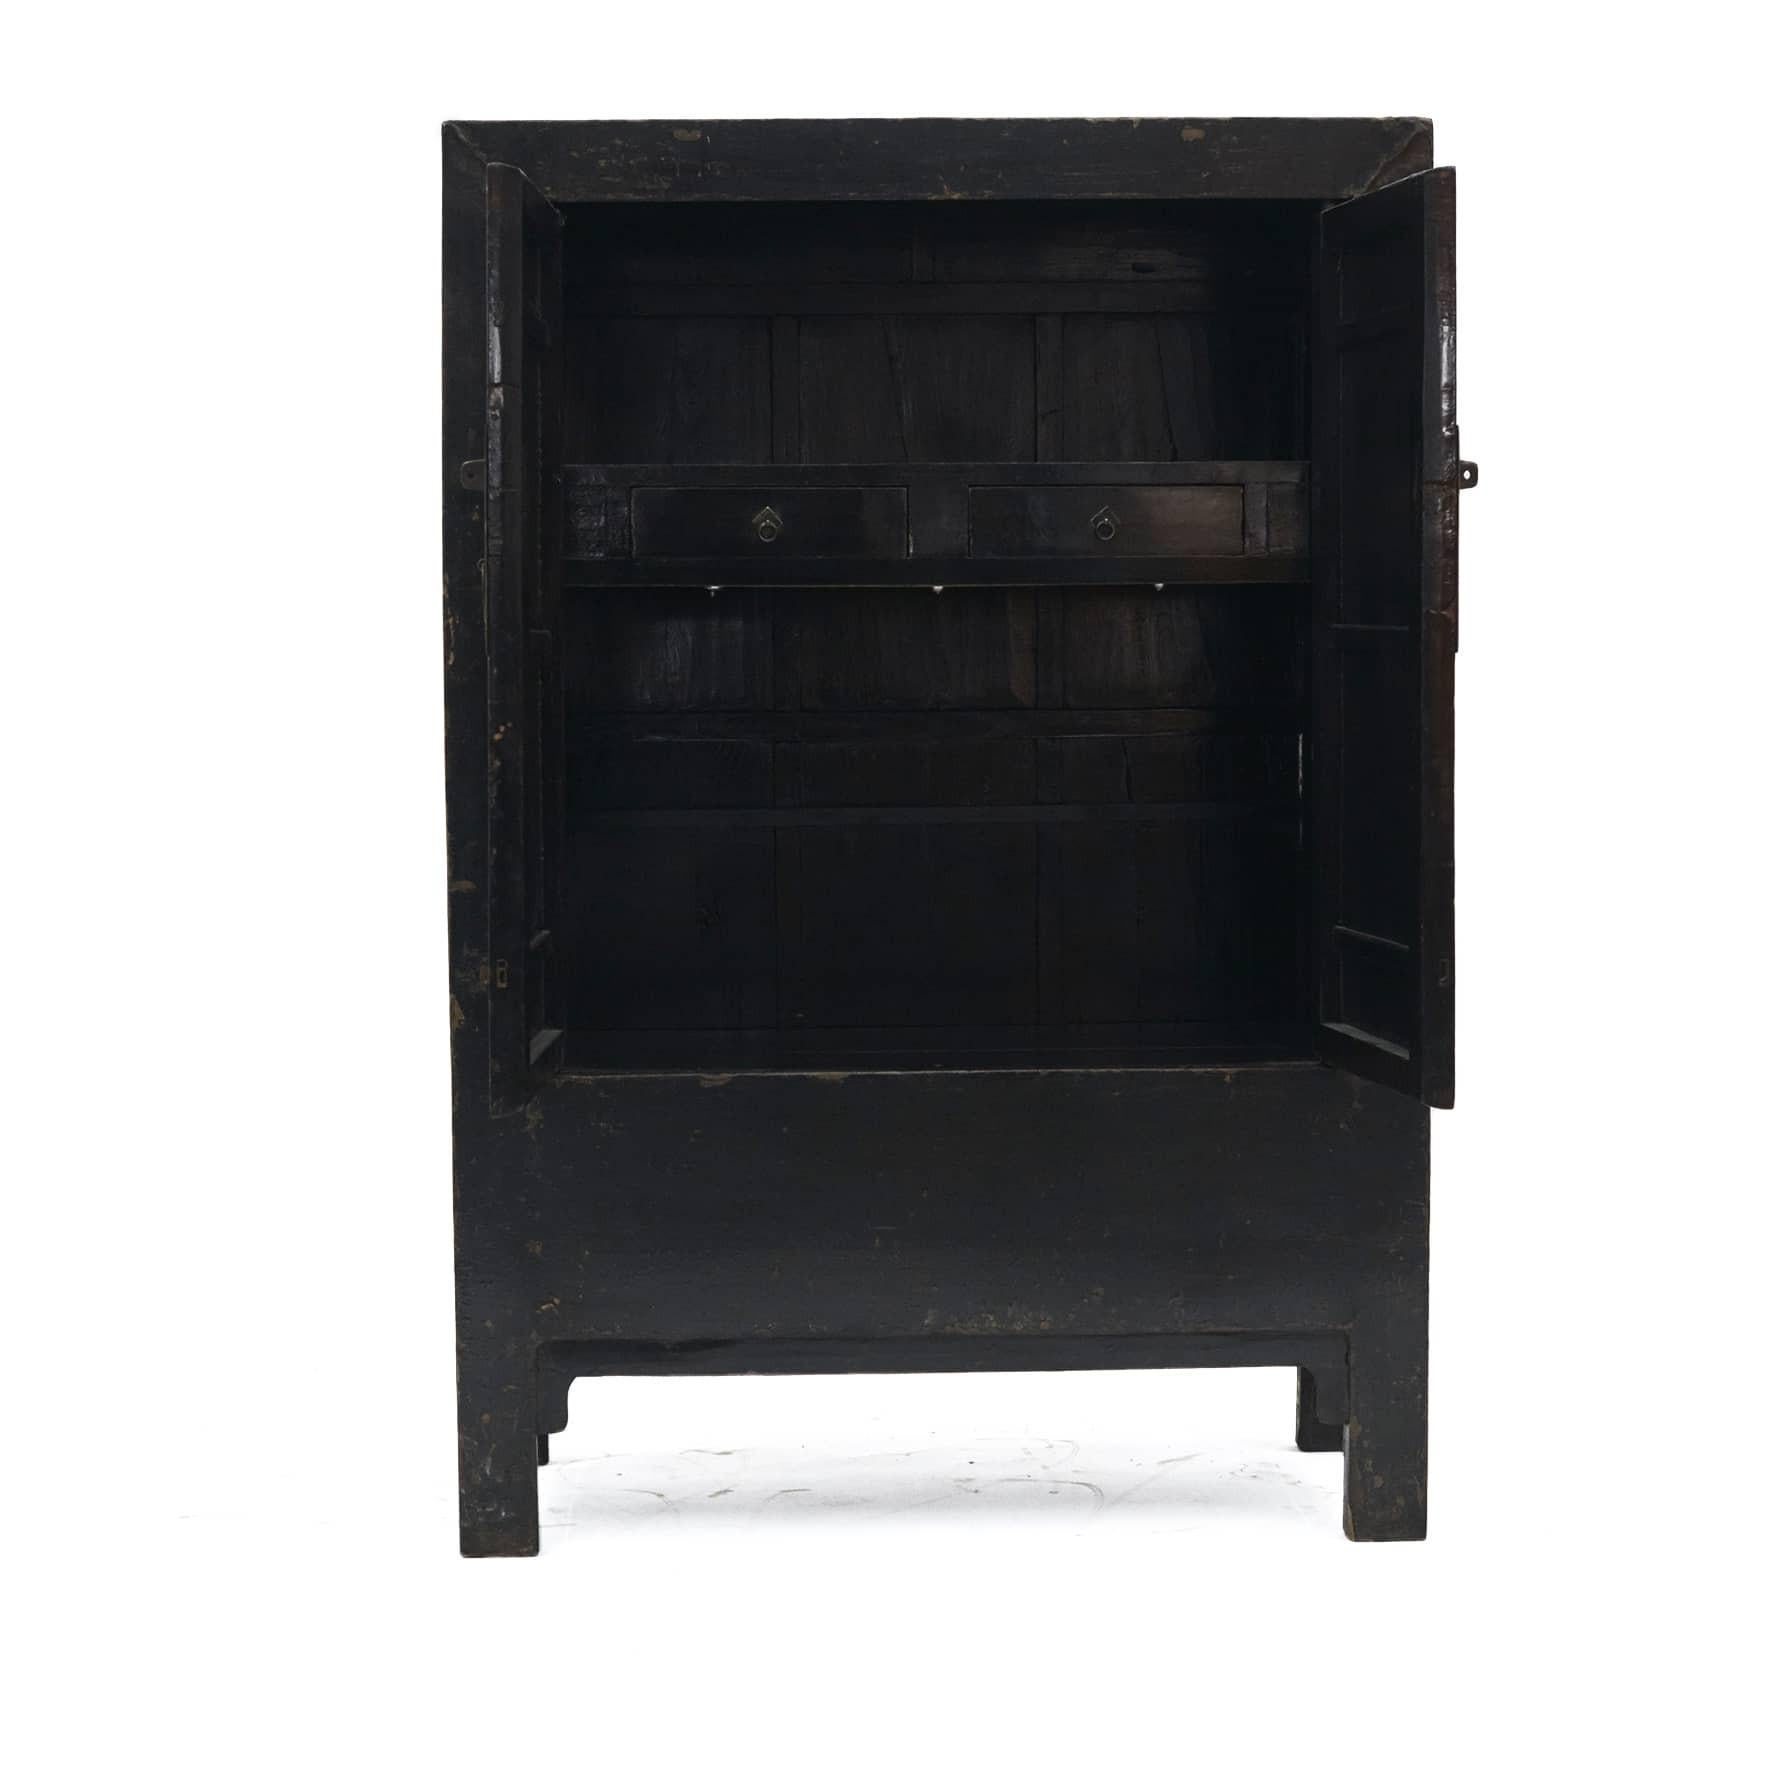 Chinese Cabinet in Original Black Lacquer, Shanxi Province, 1820-1830 For Sale